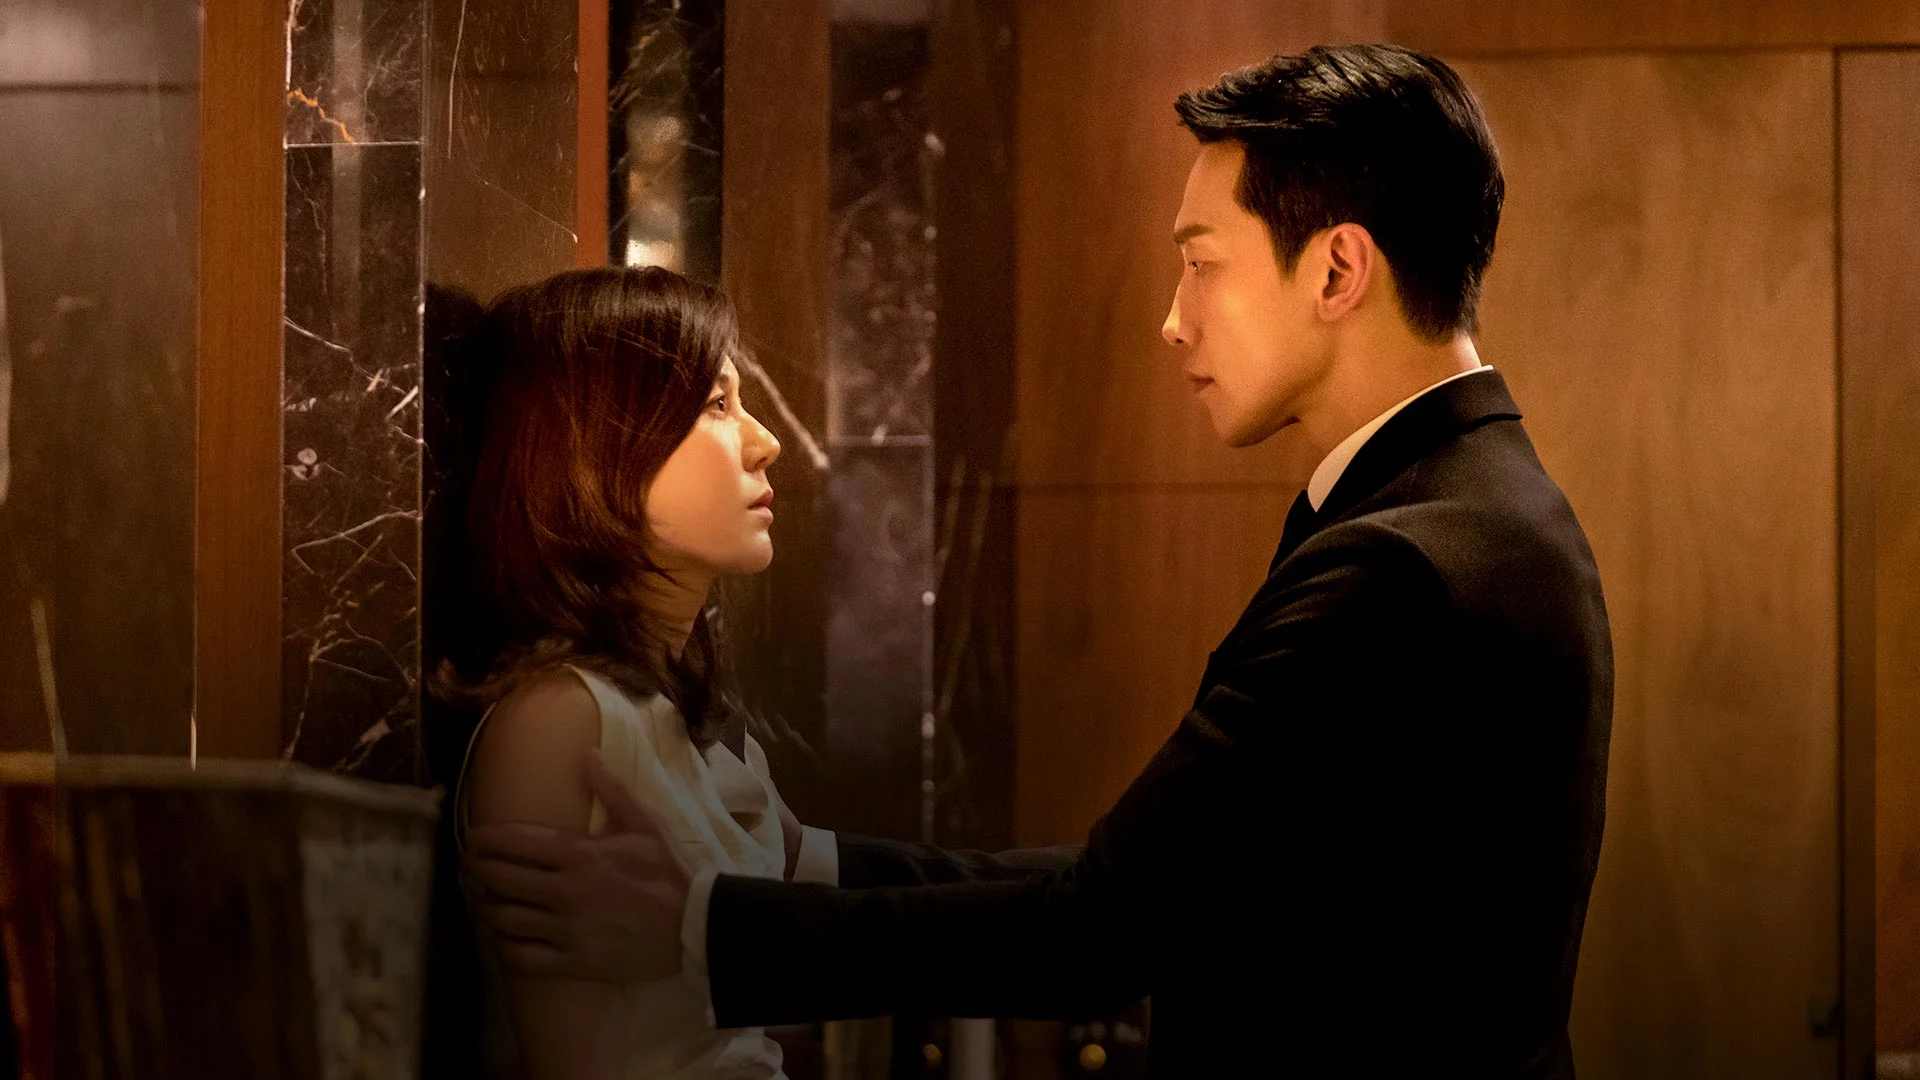 Red Swan Episode 7: Recap, Release Date, Preview, where to watch?